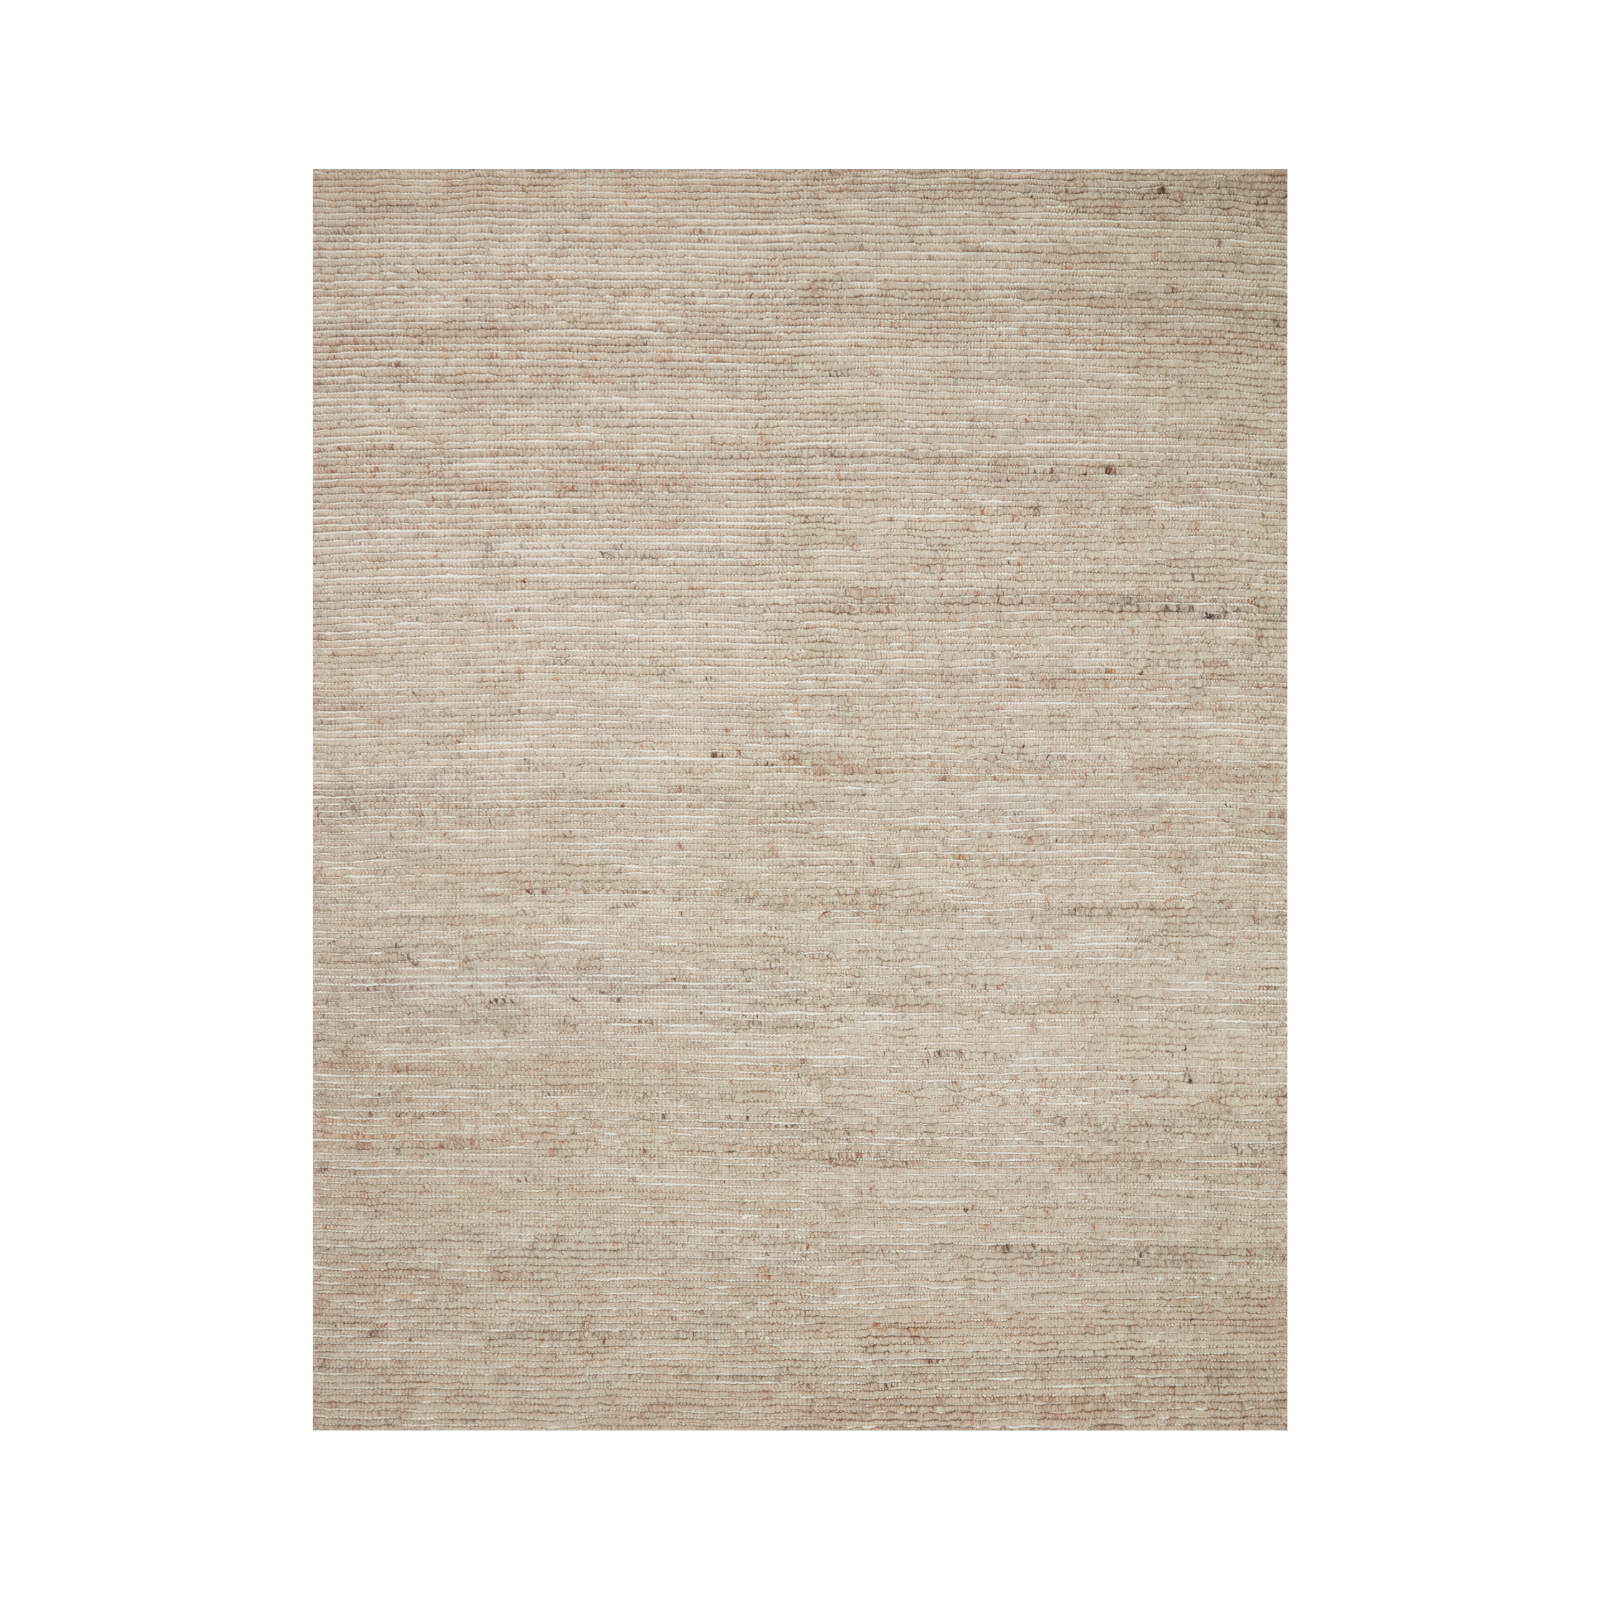 Magnolia Home by Joanna Gaines x Loloi Ava Natural / Ivory Rug